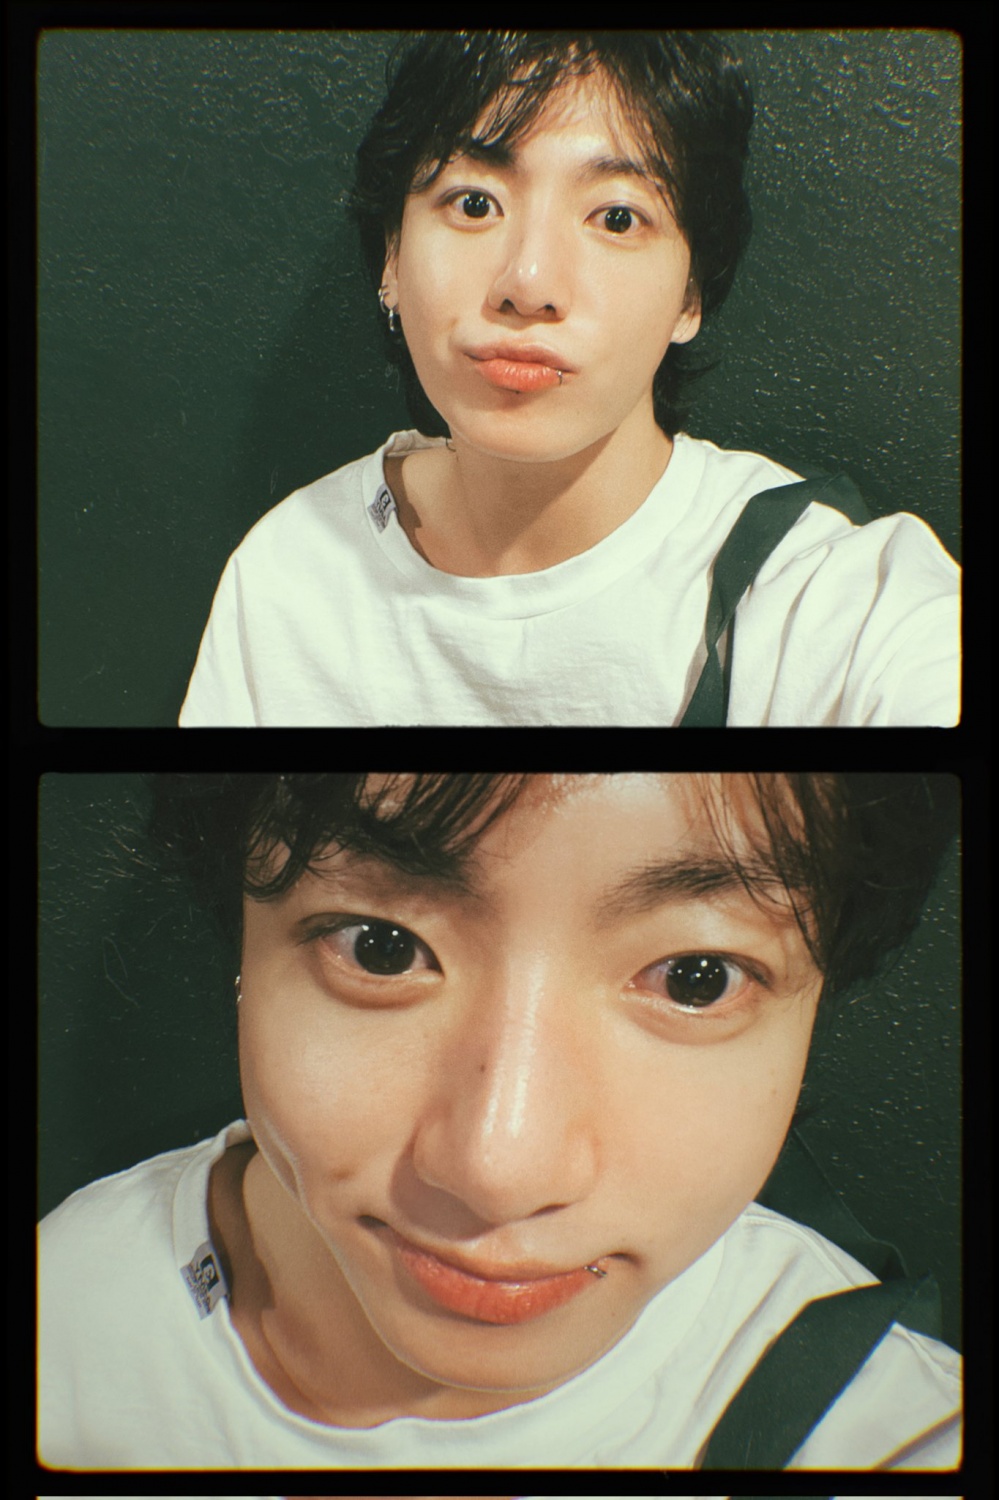 BTS Jungkook, comeback with ‘3D’… Will he hit a home run for the second time in a row after ‘Seven’?